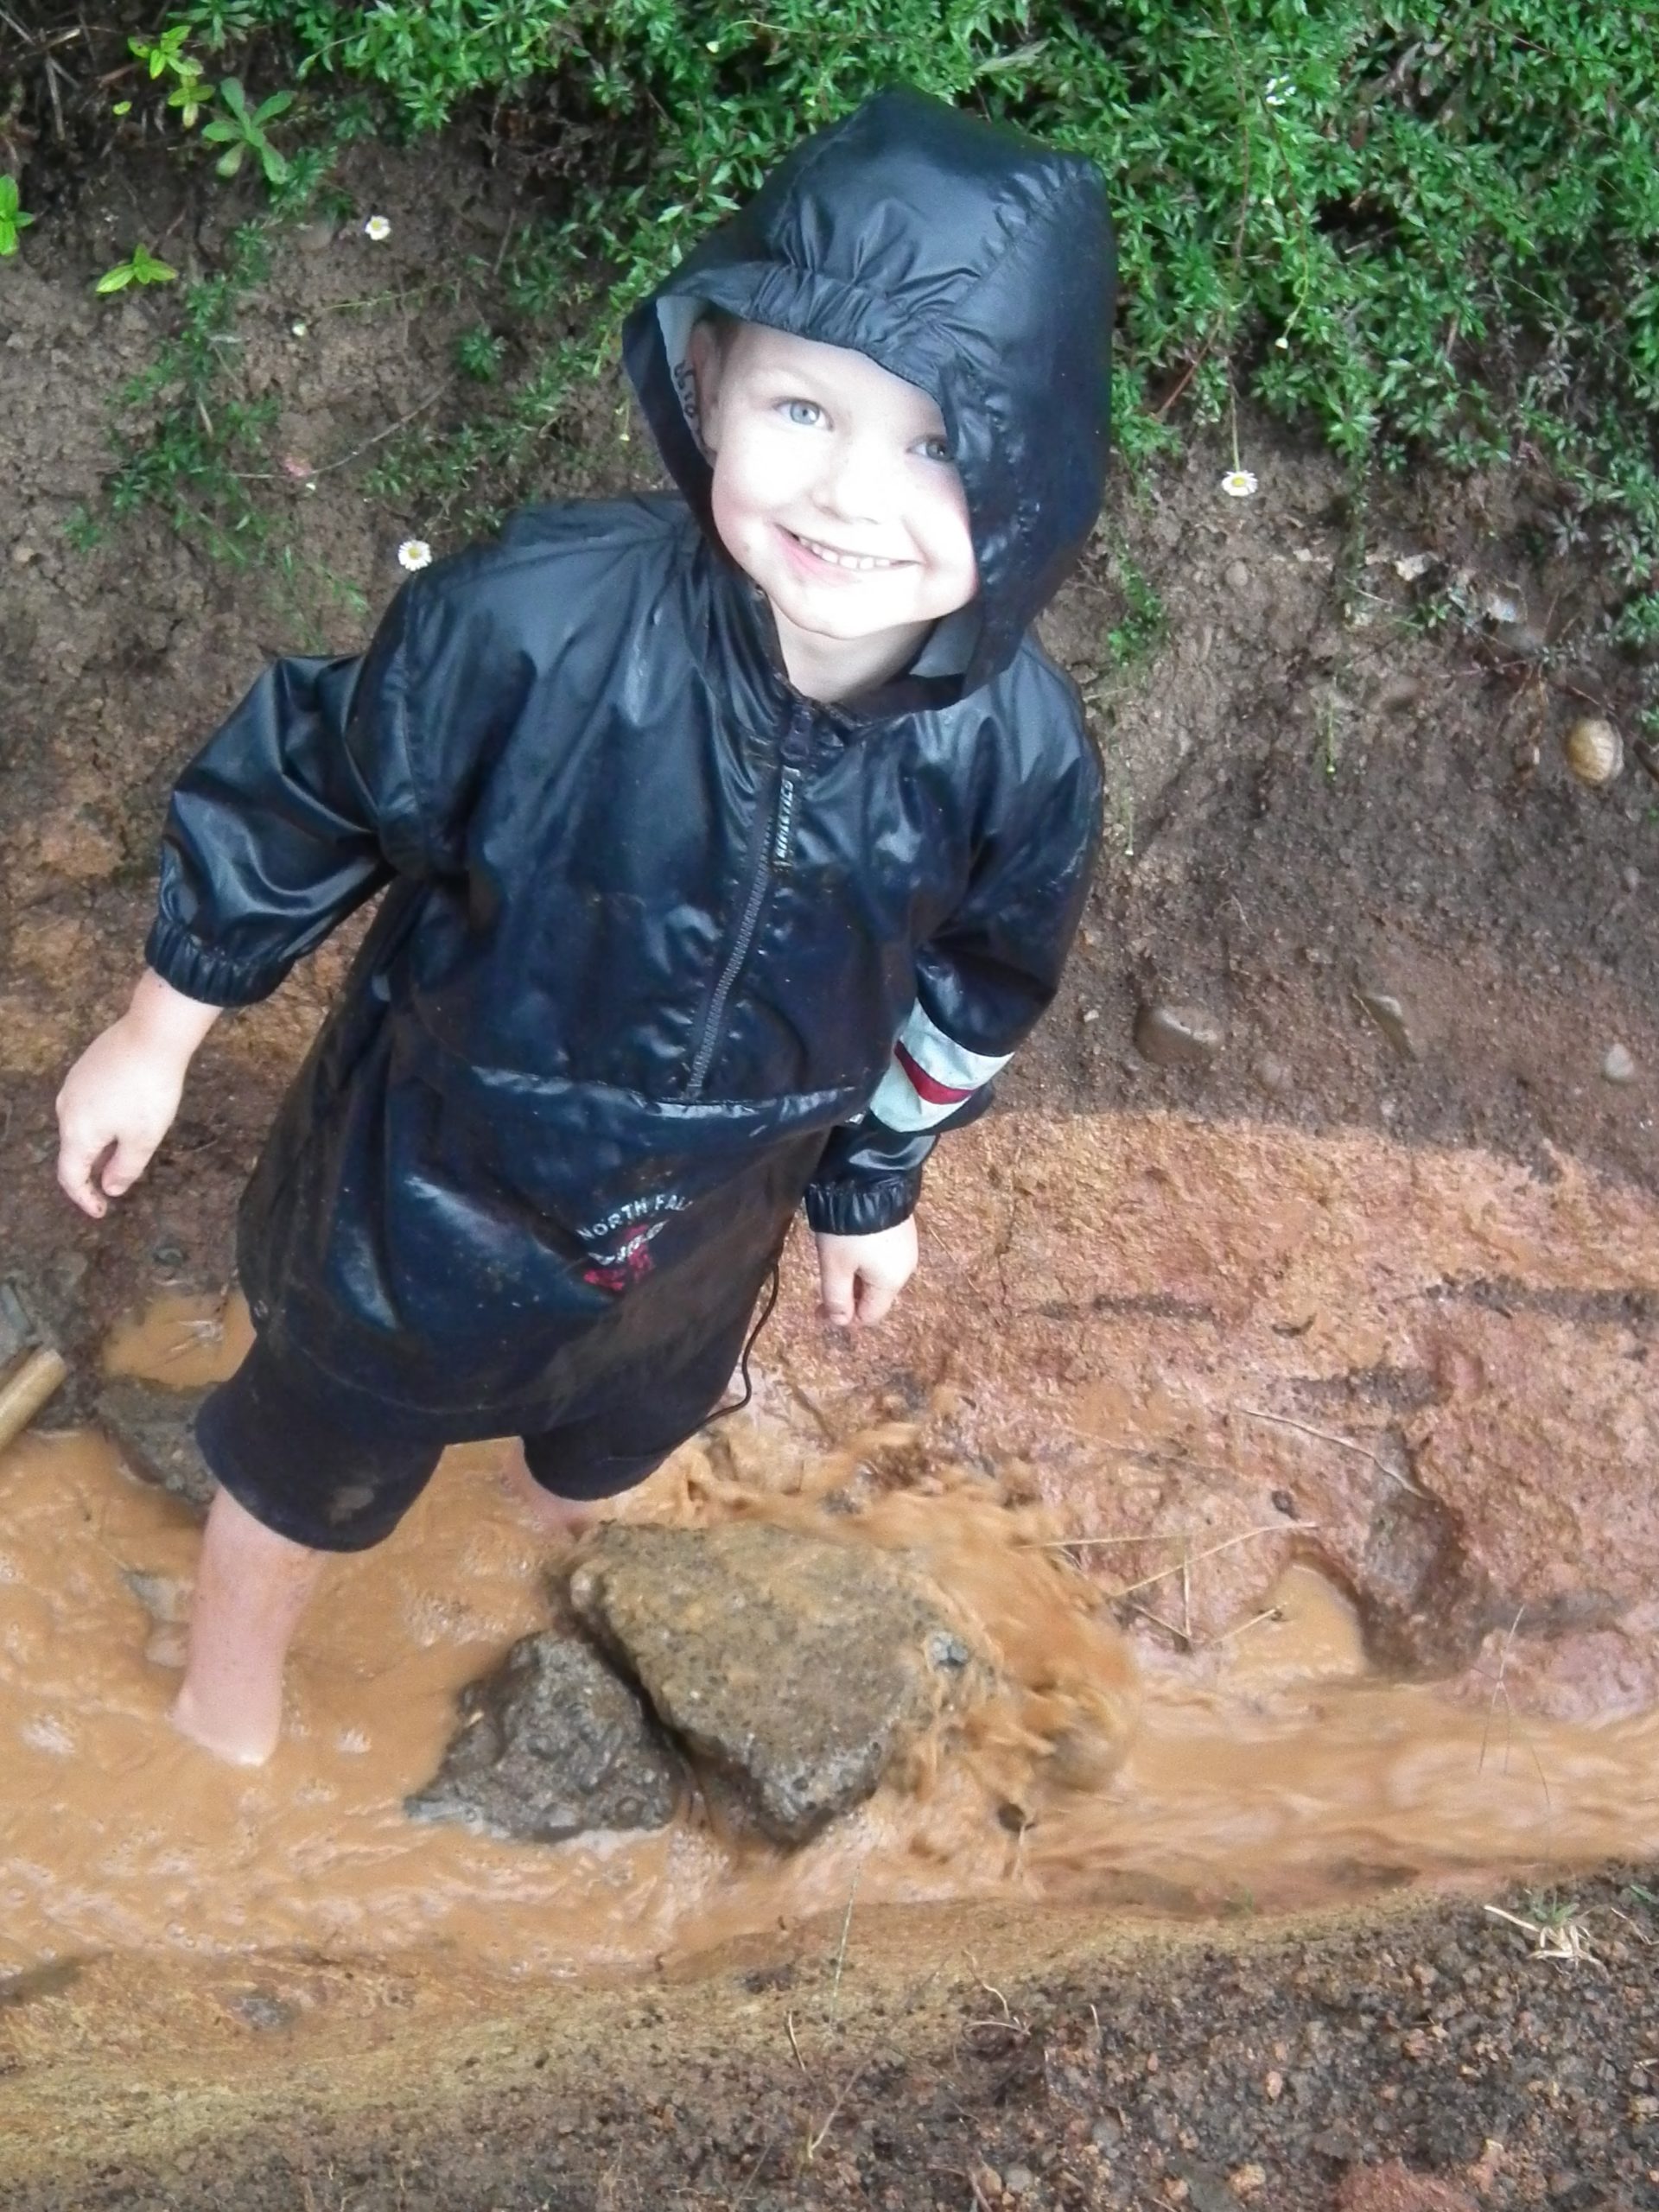 Joshua plays in the mud